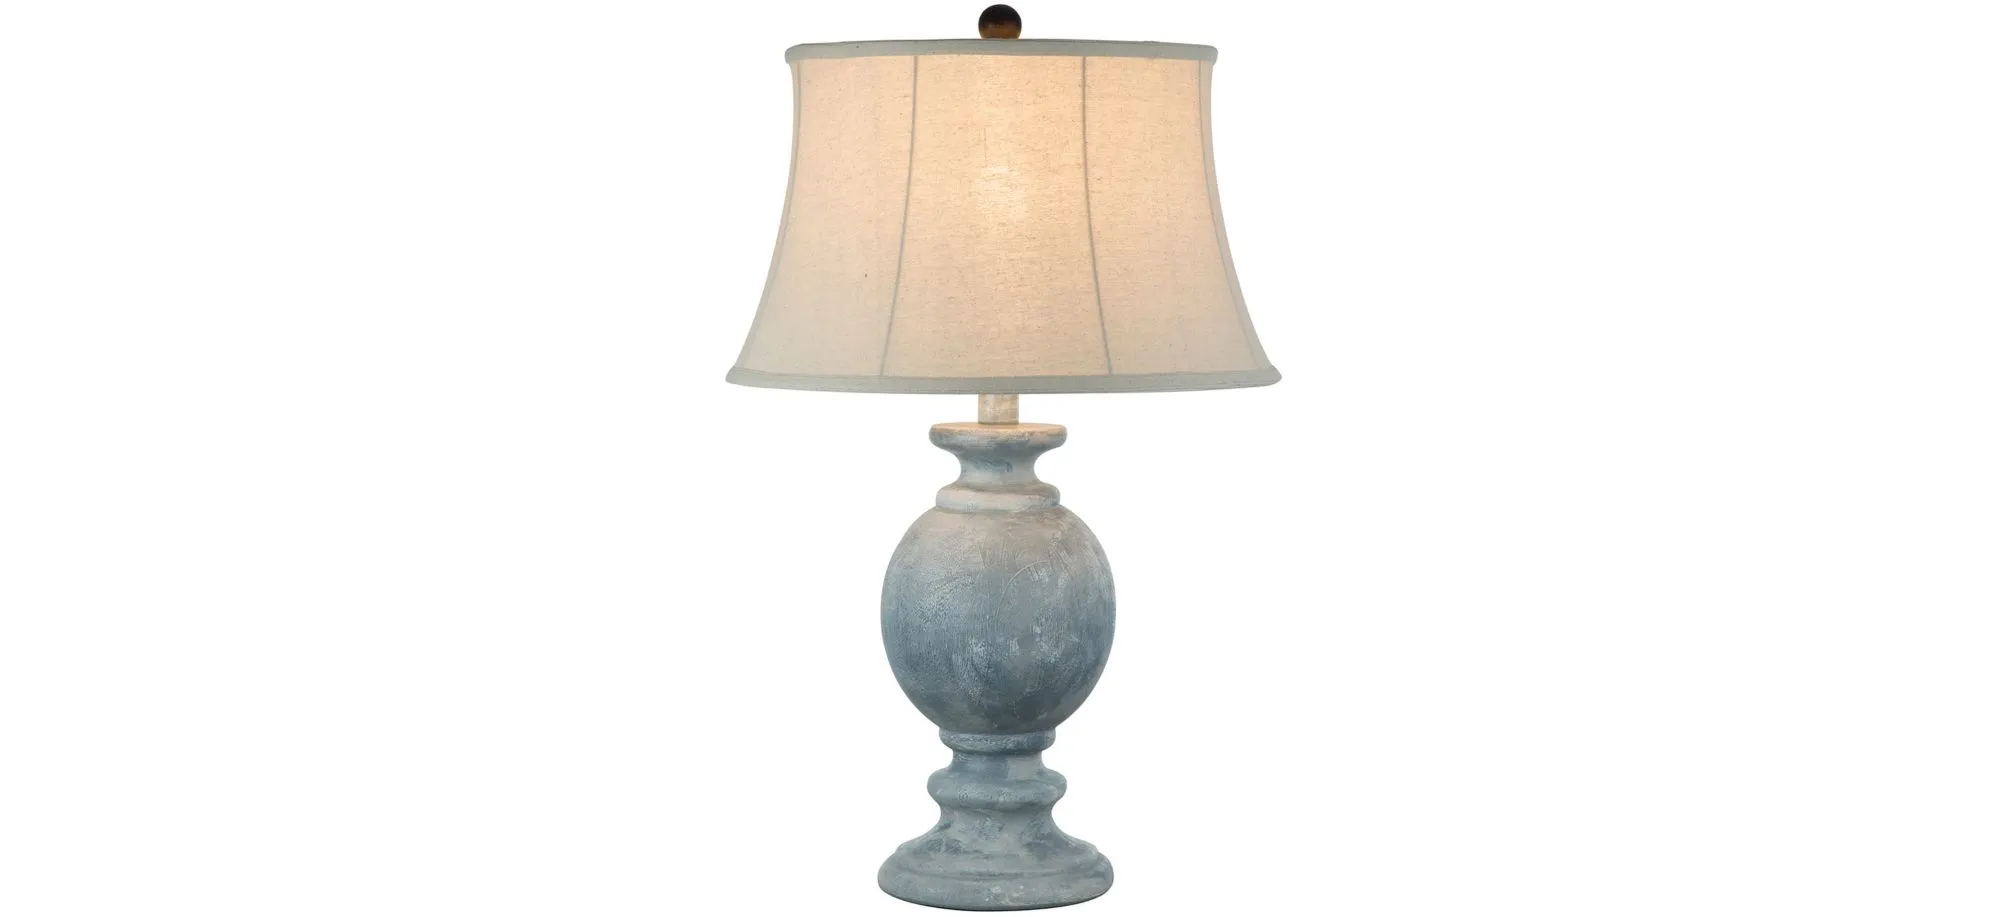 Frosted Ash Table Lamp in Light Blue by Anthony California